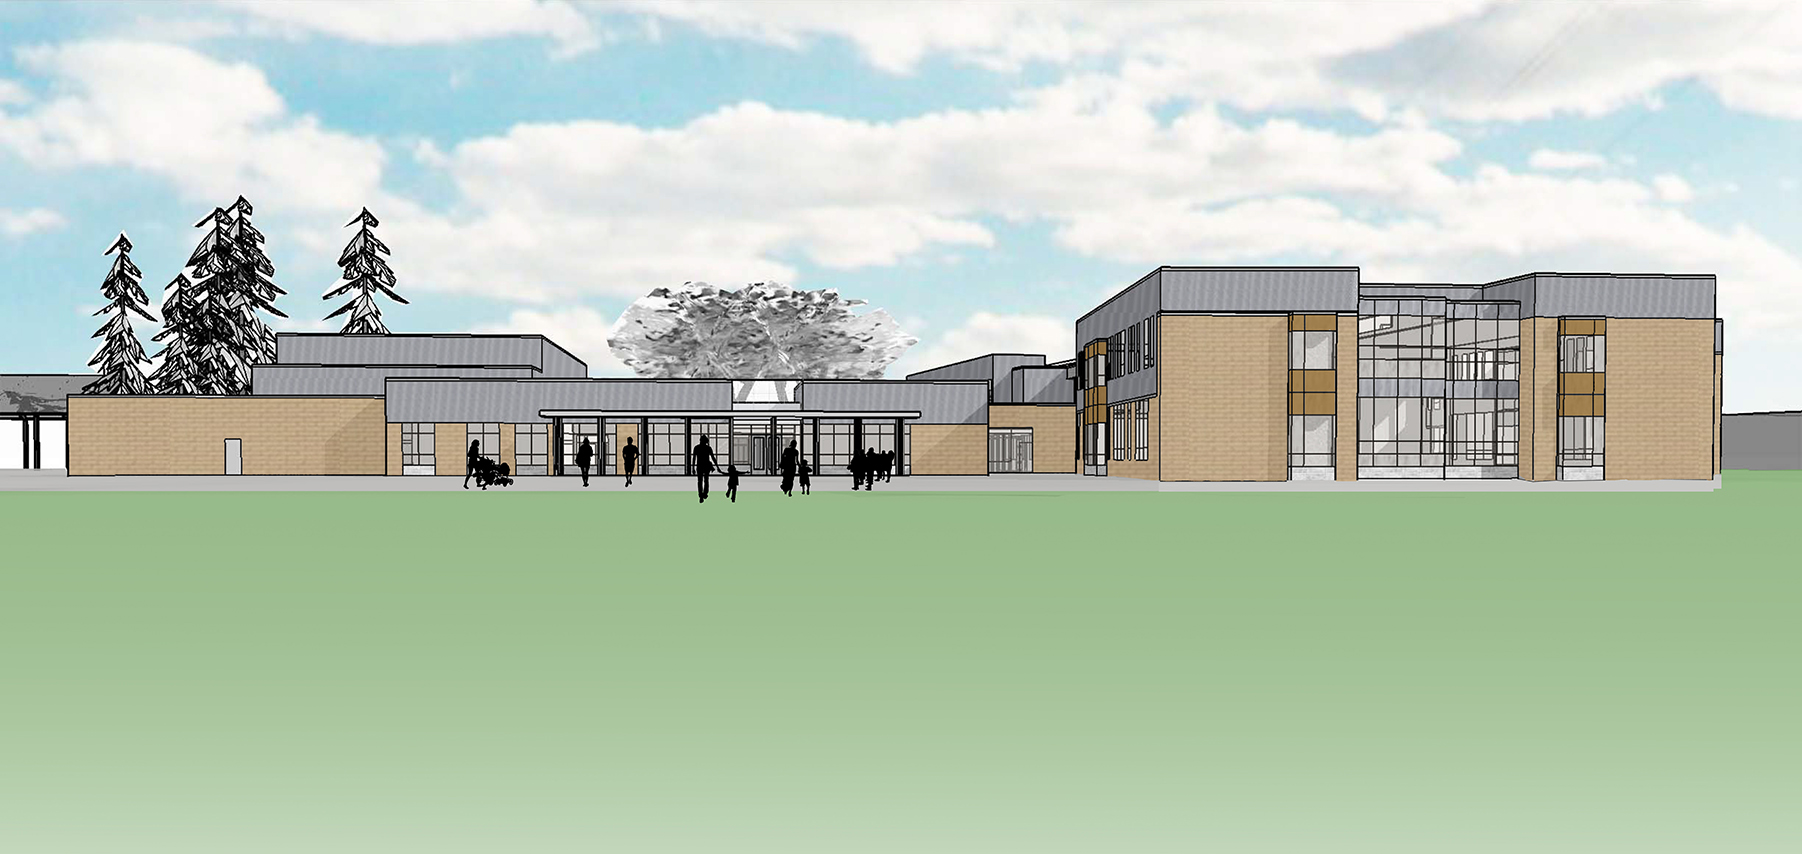 rendering of the exterior of Truman Elementary